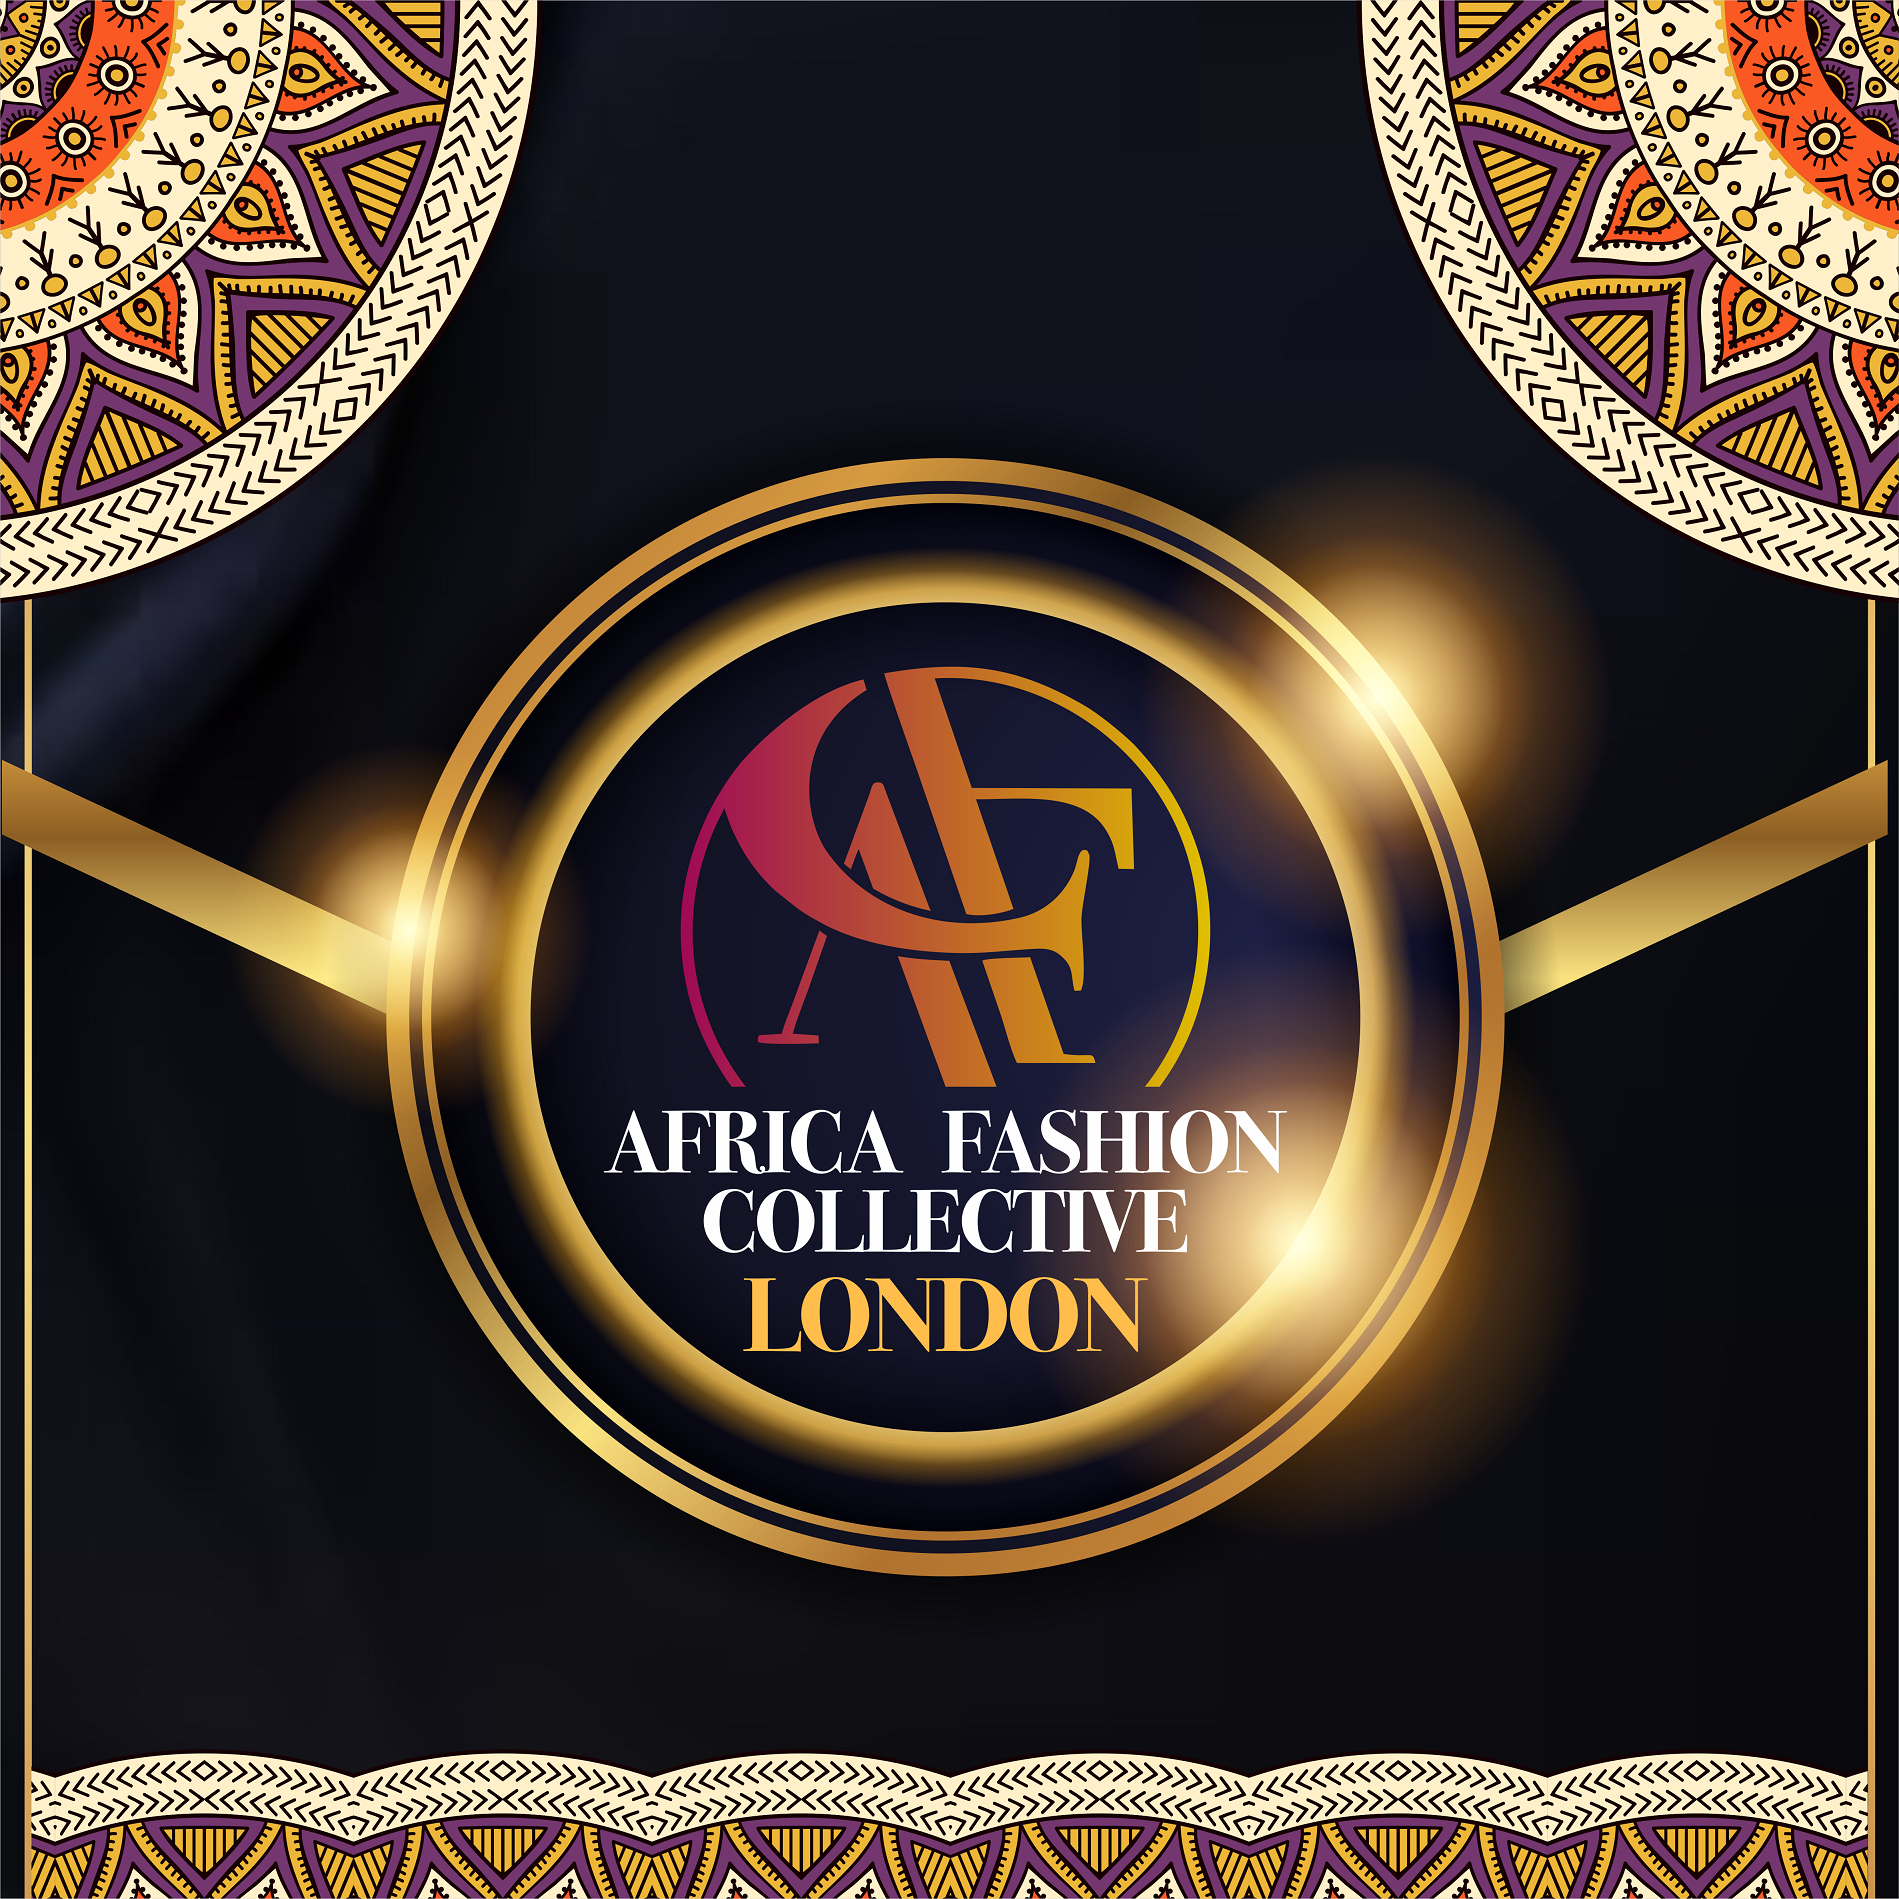 The Africa Fashion Collective London brand